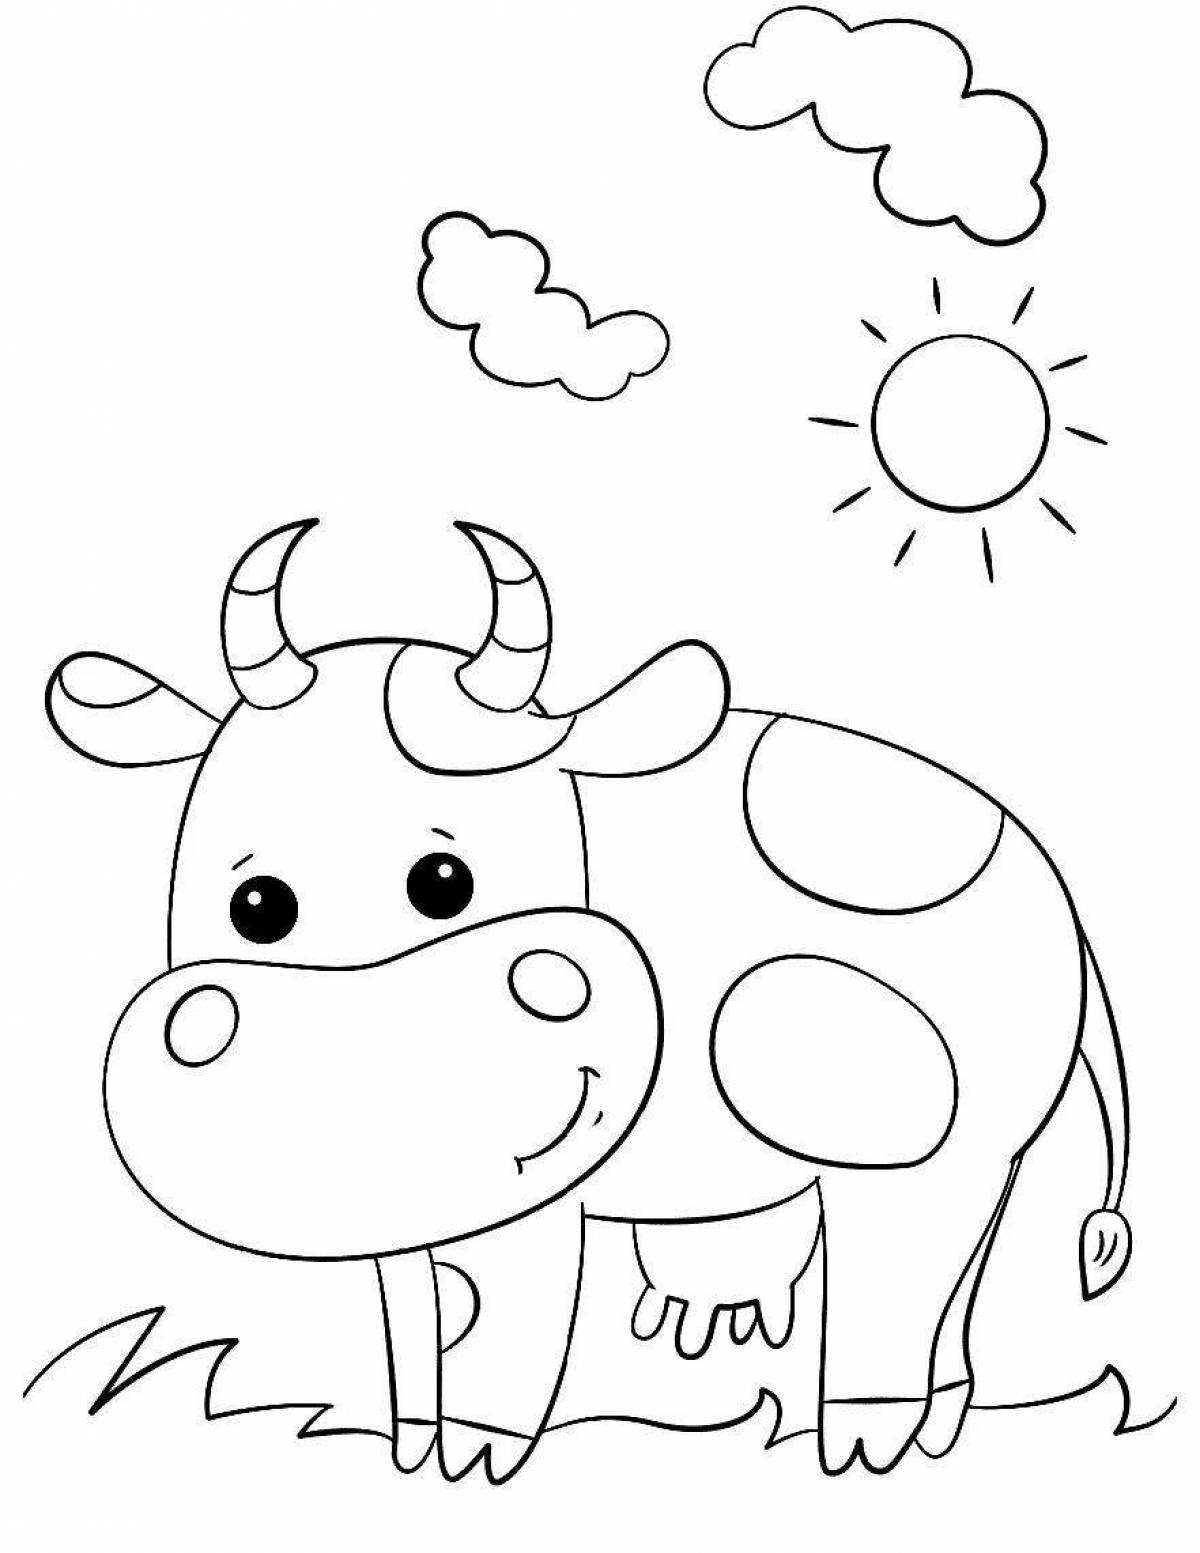 Animated cow coloring page for 3-4 year olds